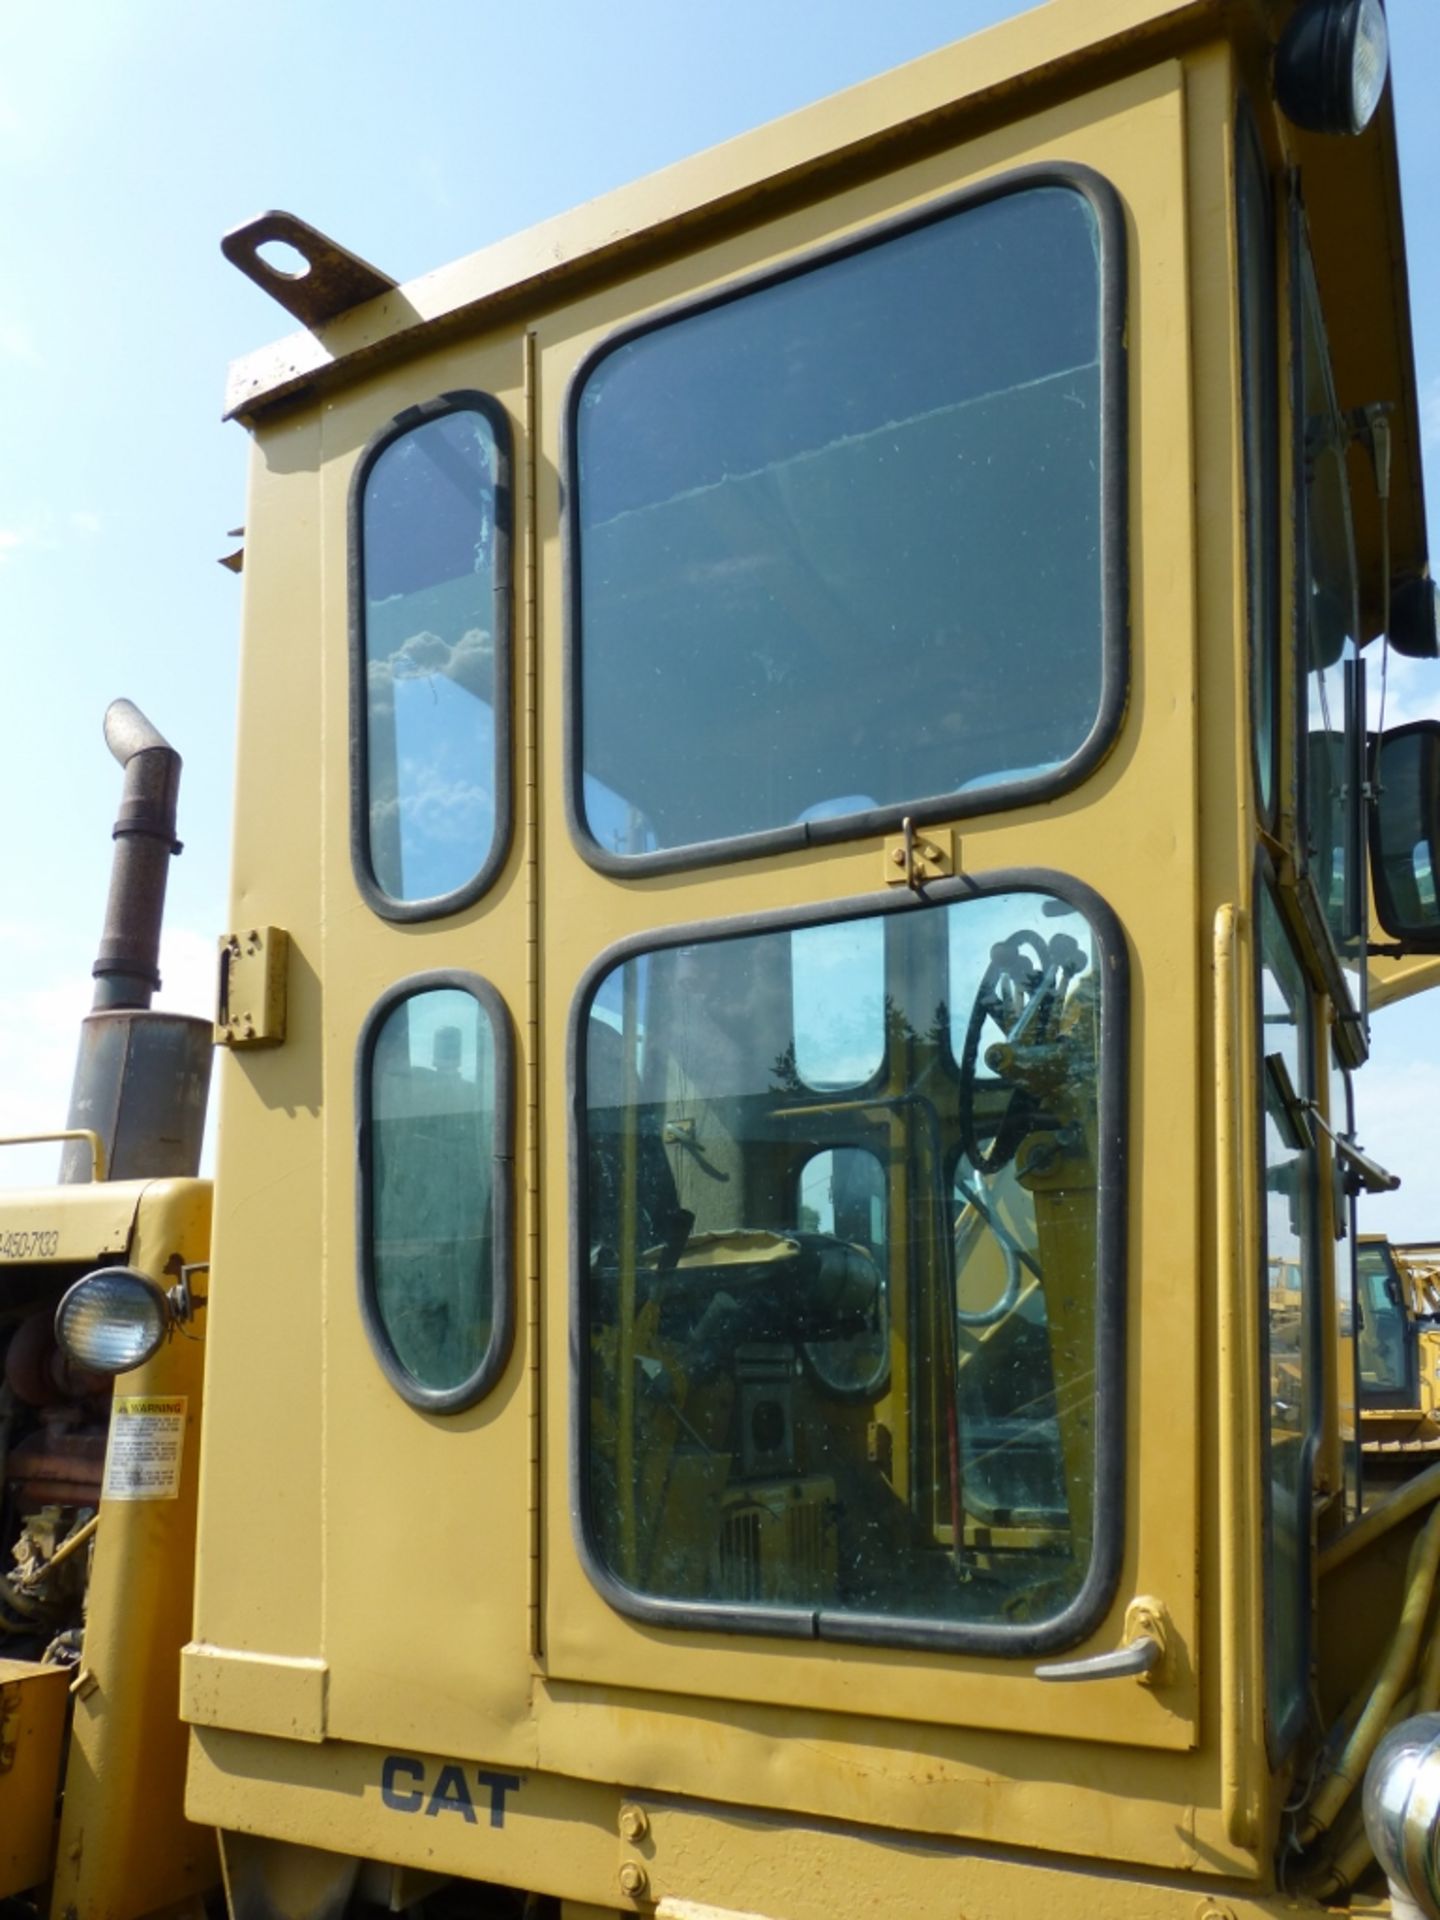 Caterpillar 120G motor grader with 13'10" moldboard se:87v871. Power shift. 7720 unverified hrs. - Image 10 of 27